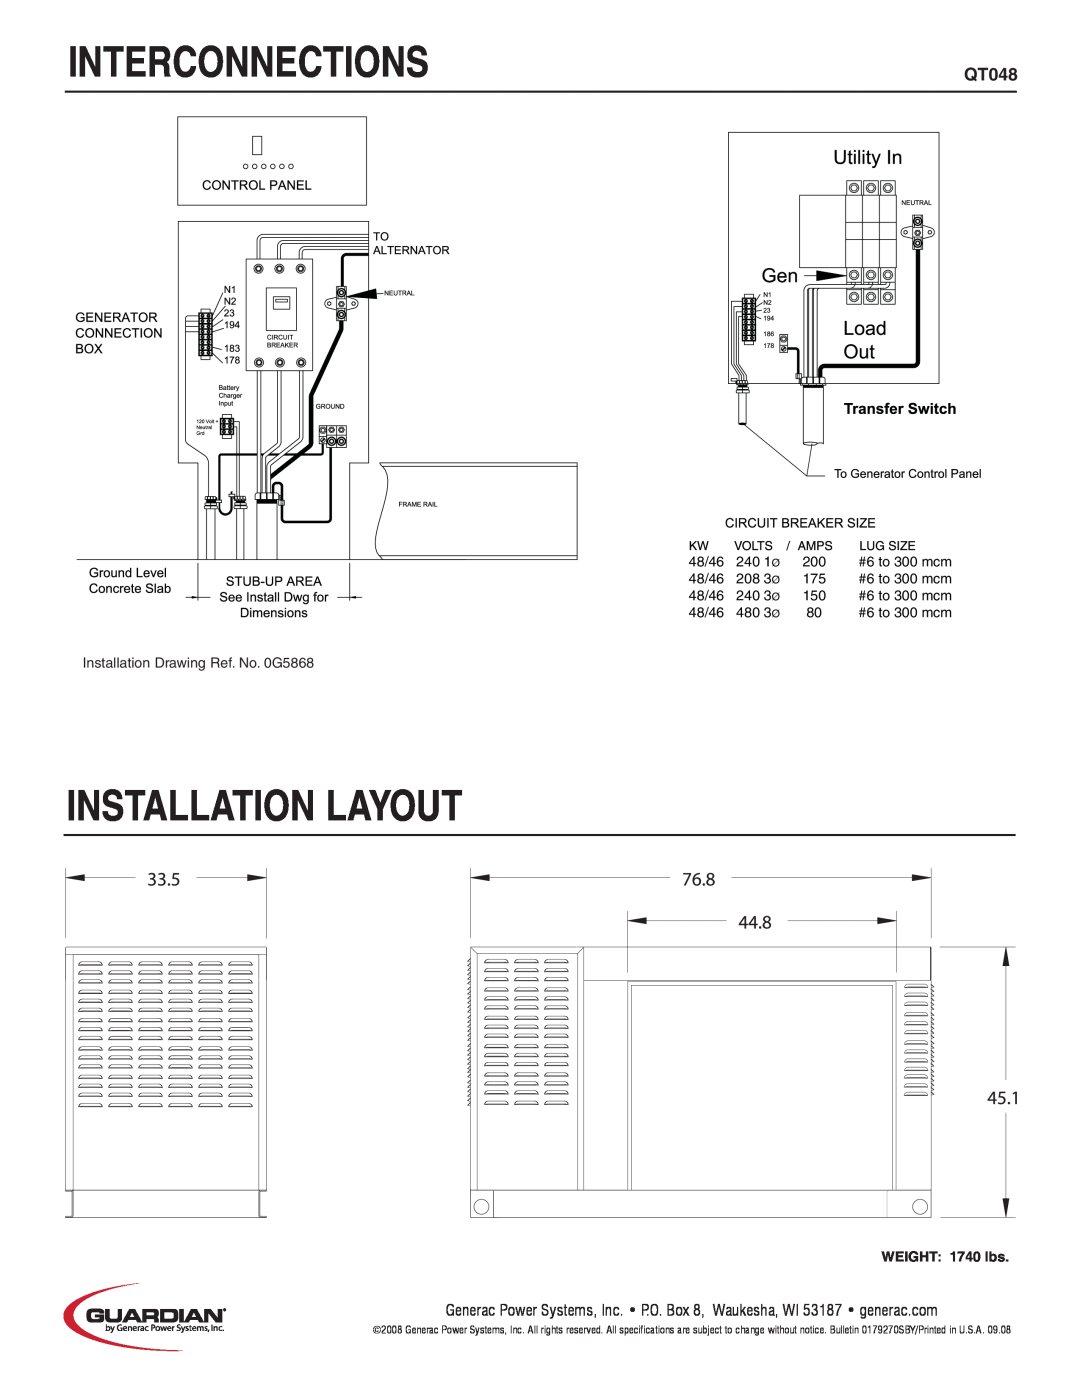 Guardian Technologies QT048 manual Interconnections, Installation Layout, WEIGHT 1740 lbs 